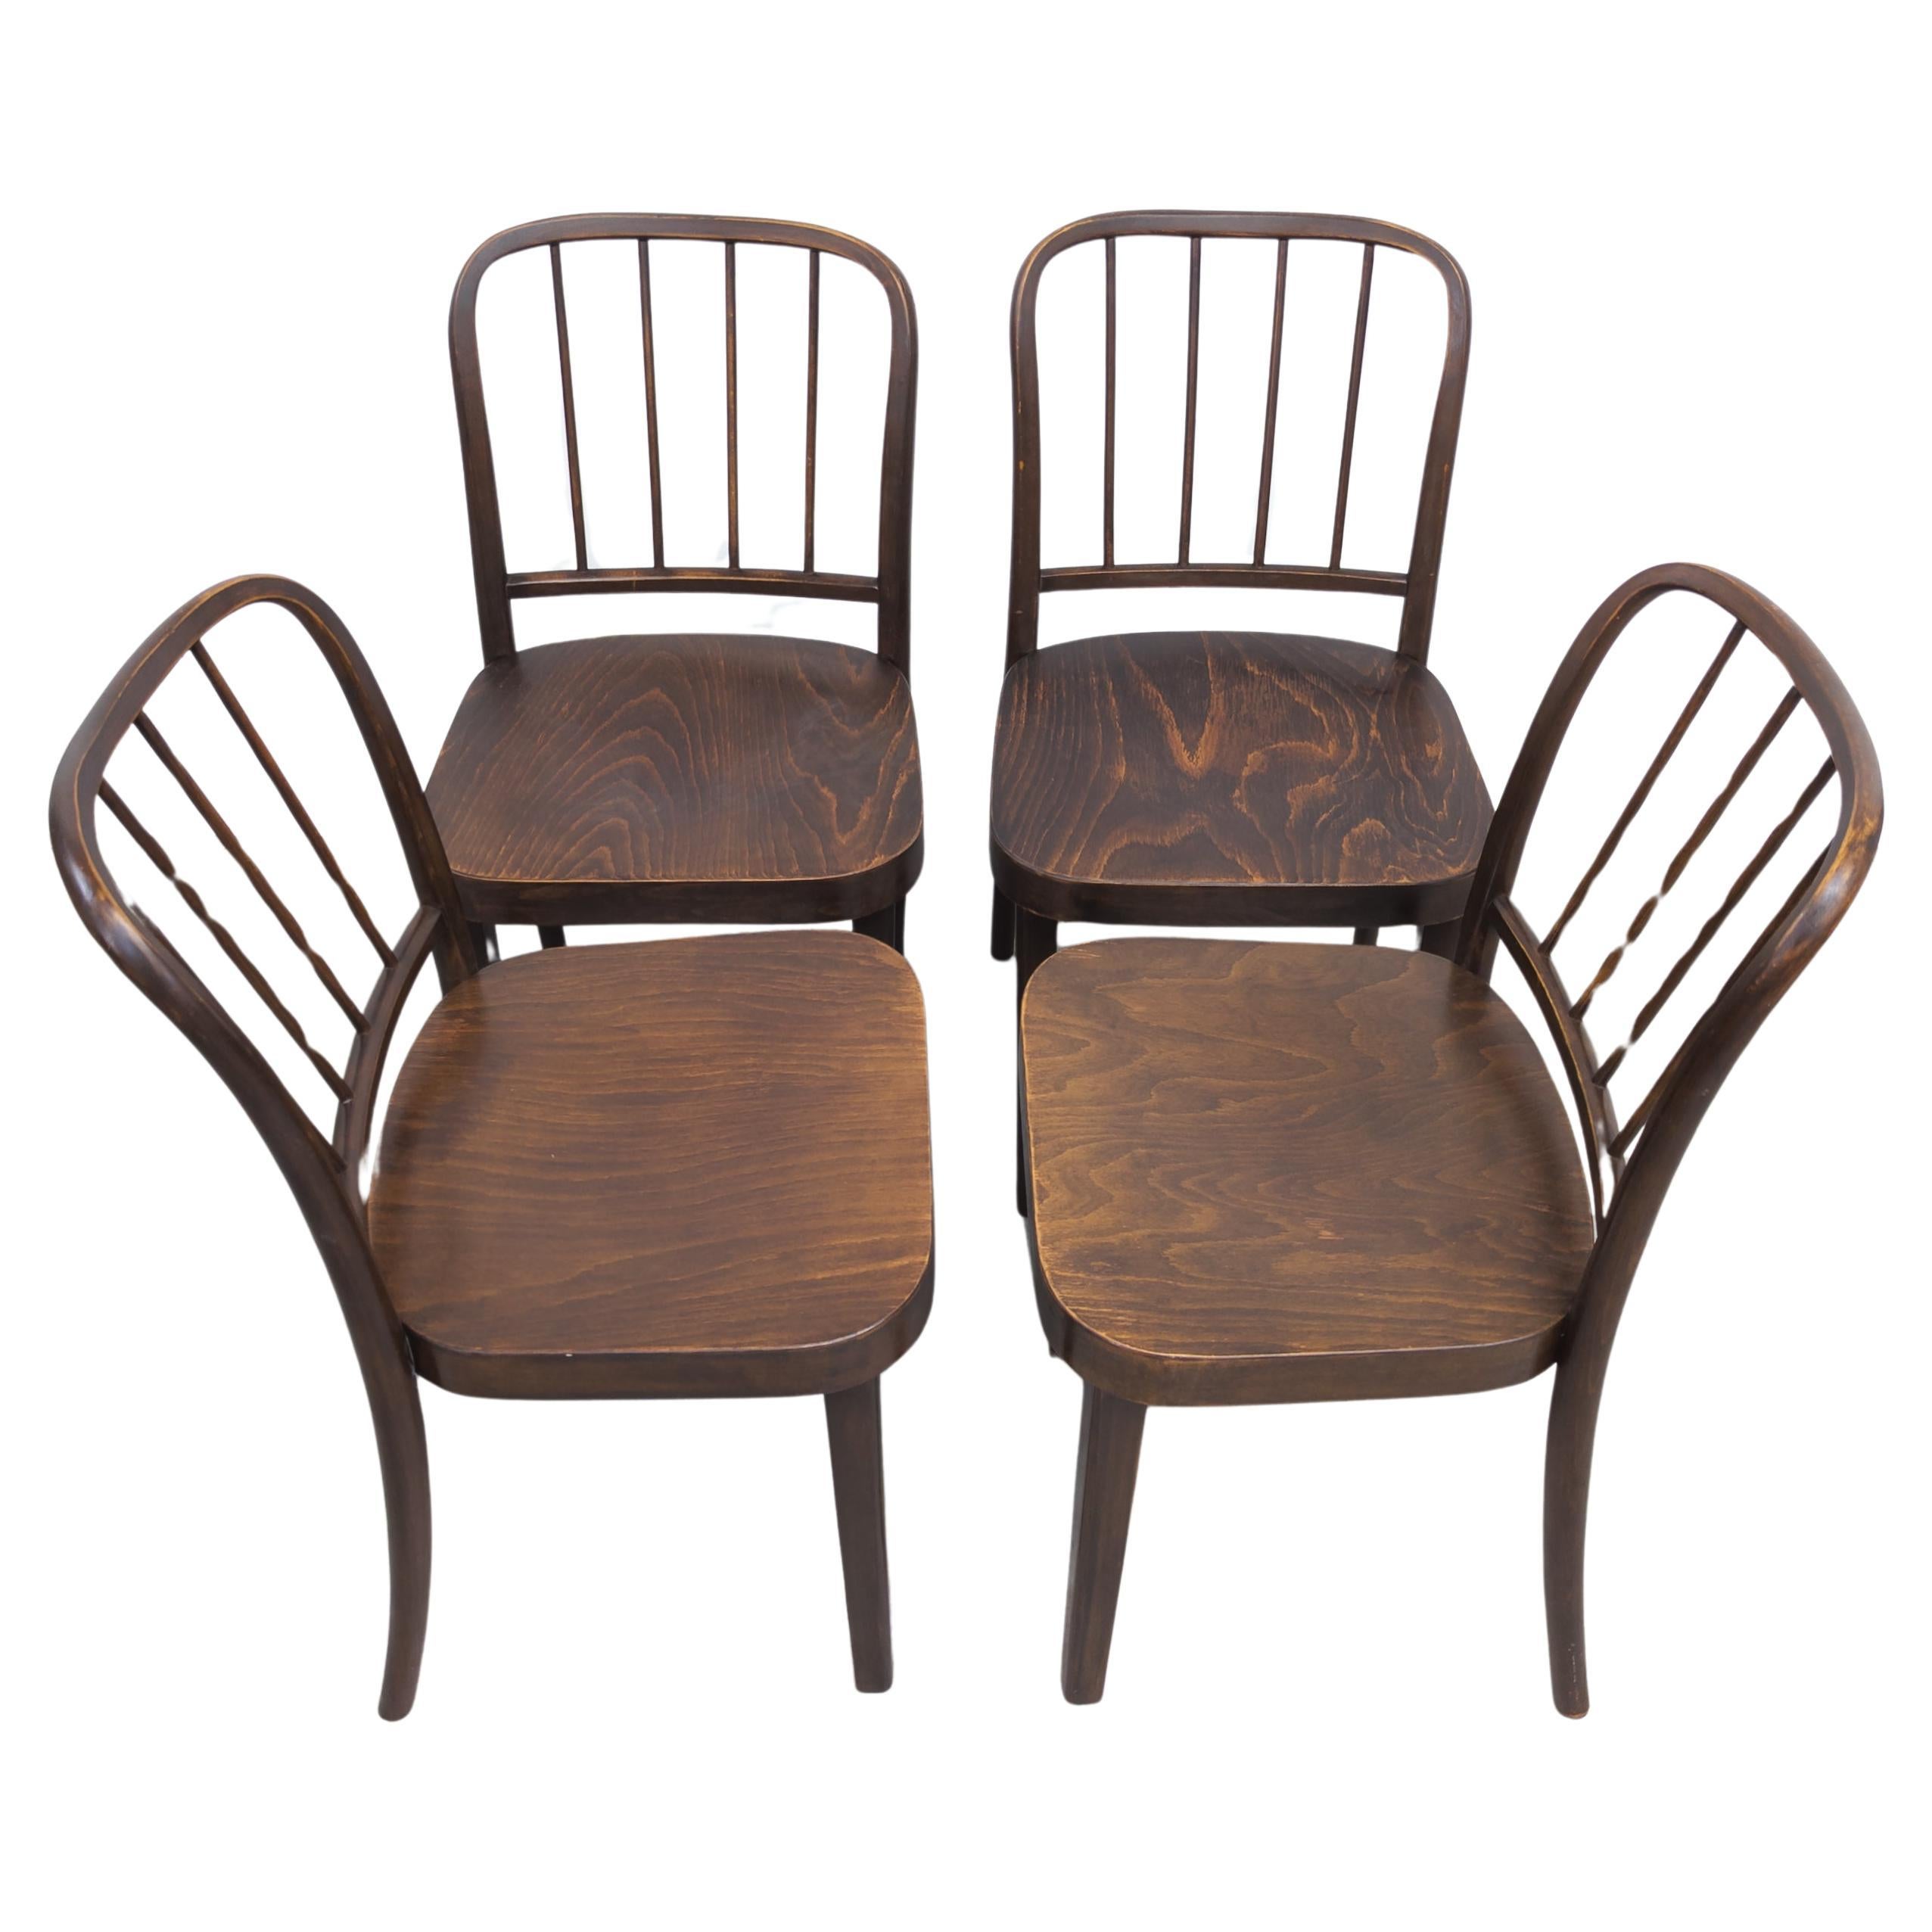 Rare Thonet A 811/4 dining chairs by Josef Hoffmann, 1930s